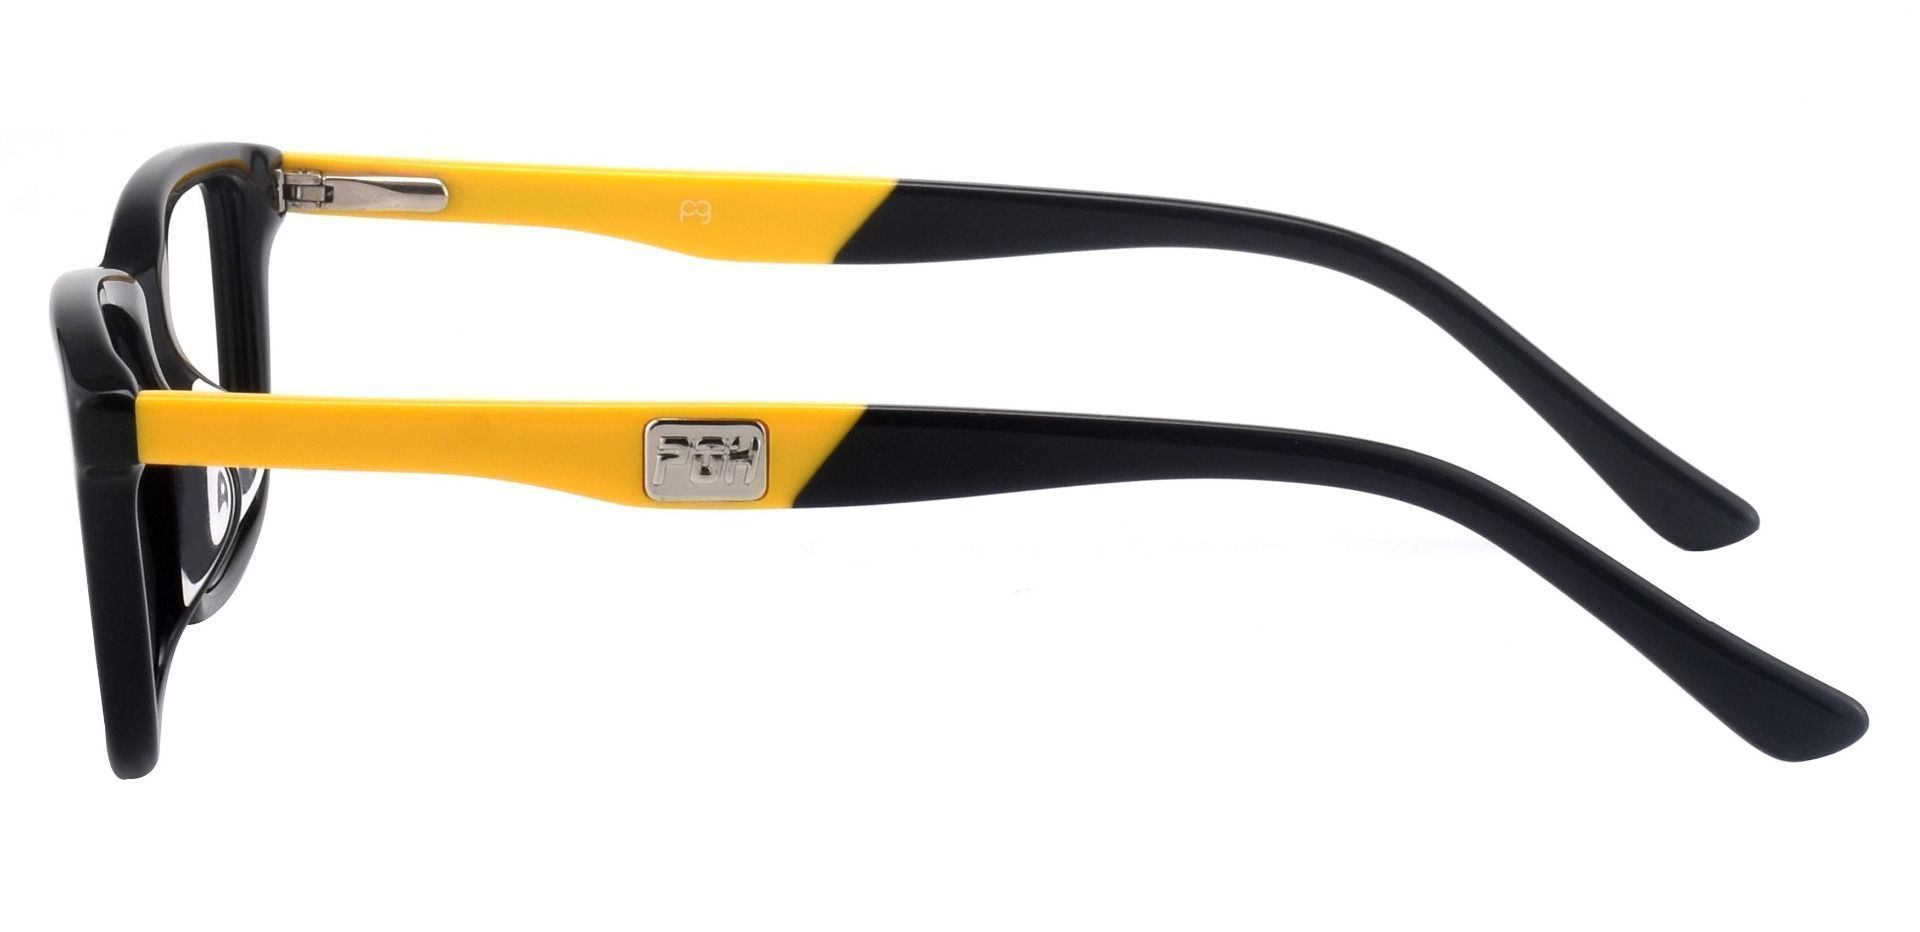 Allegheny Rectangle Lined Bifocal Glasses - Black-yellow